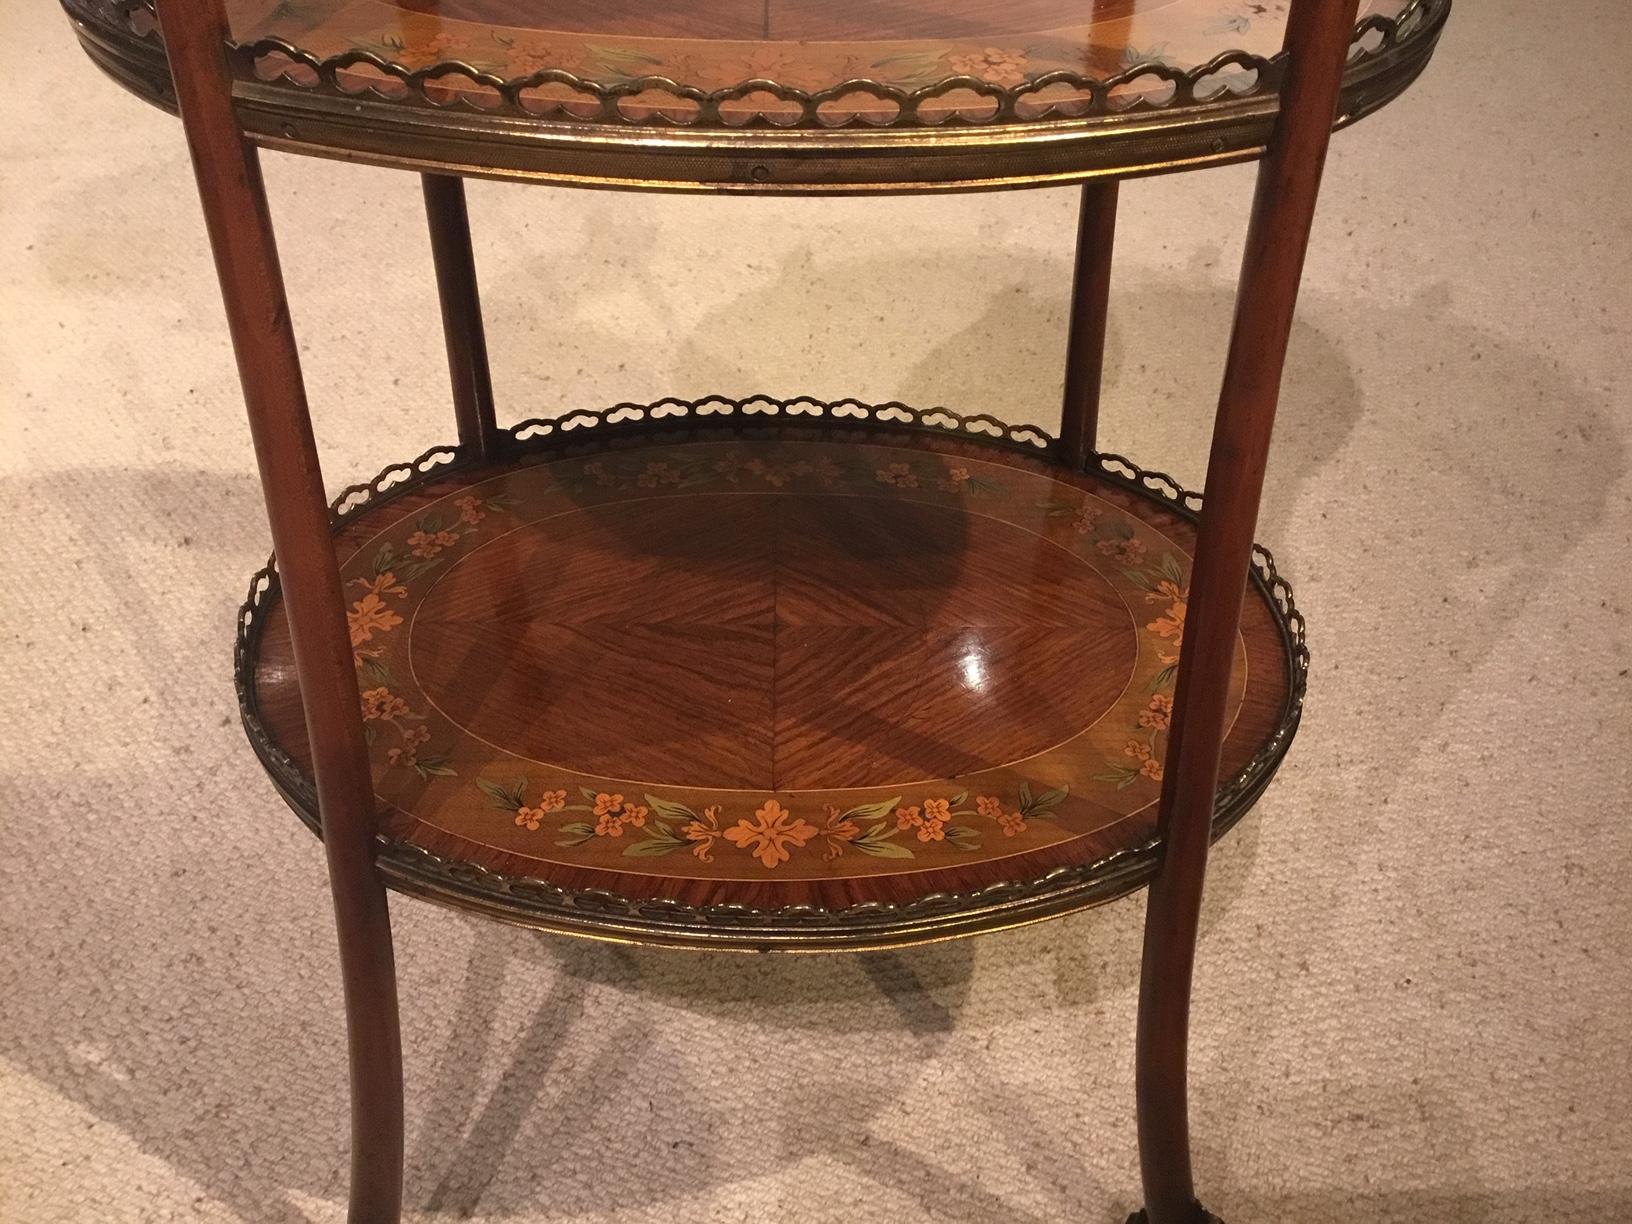 Edwardian Period Kingwood, Sycamore and Marquetry Inlaid Étagère For Sale 3